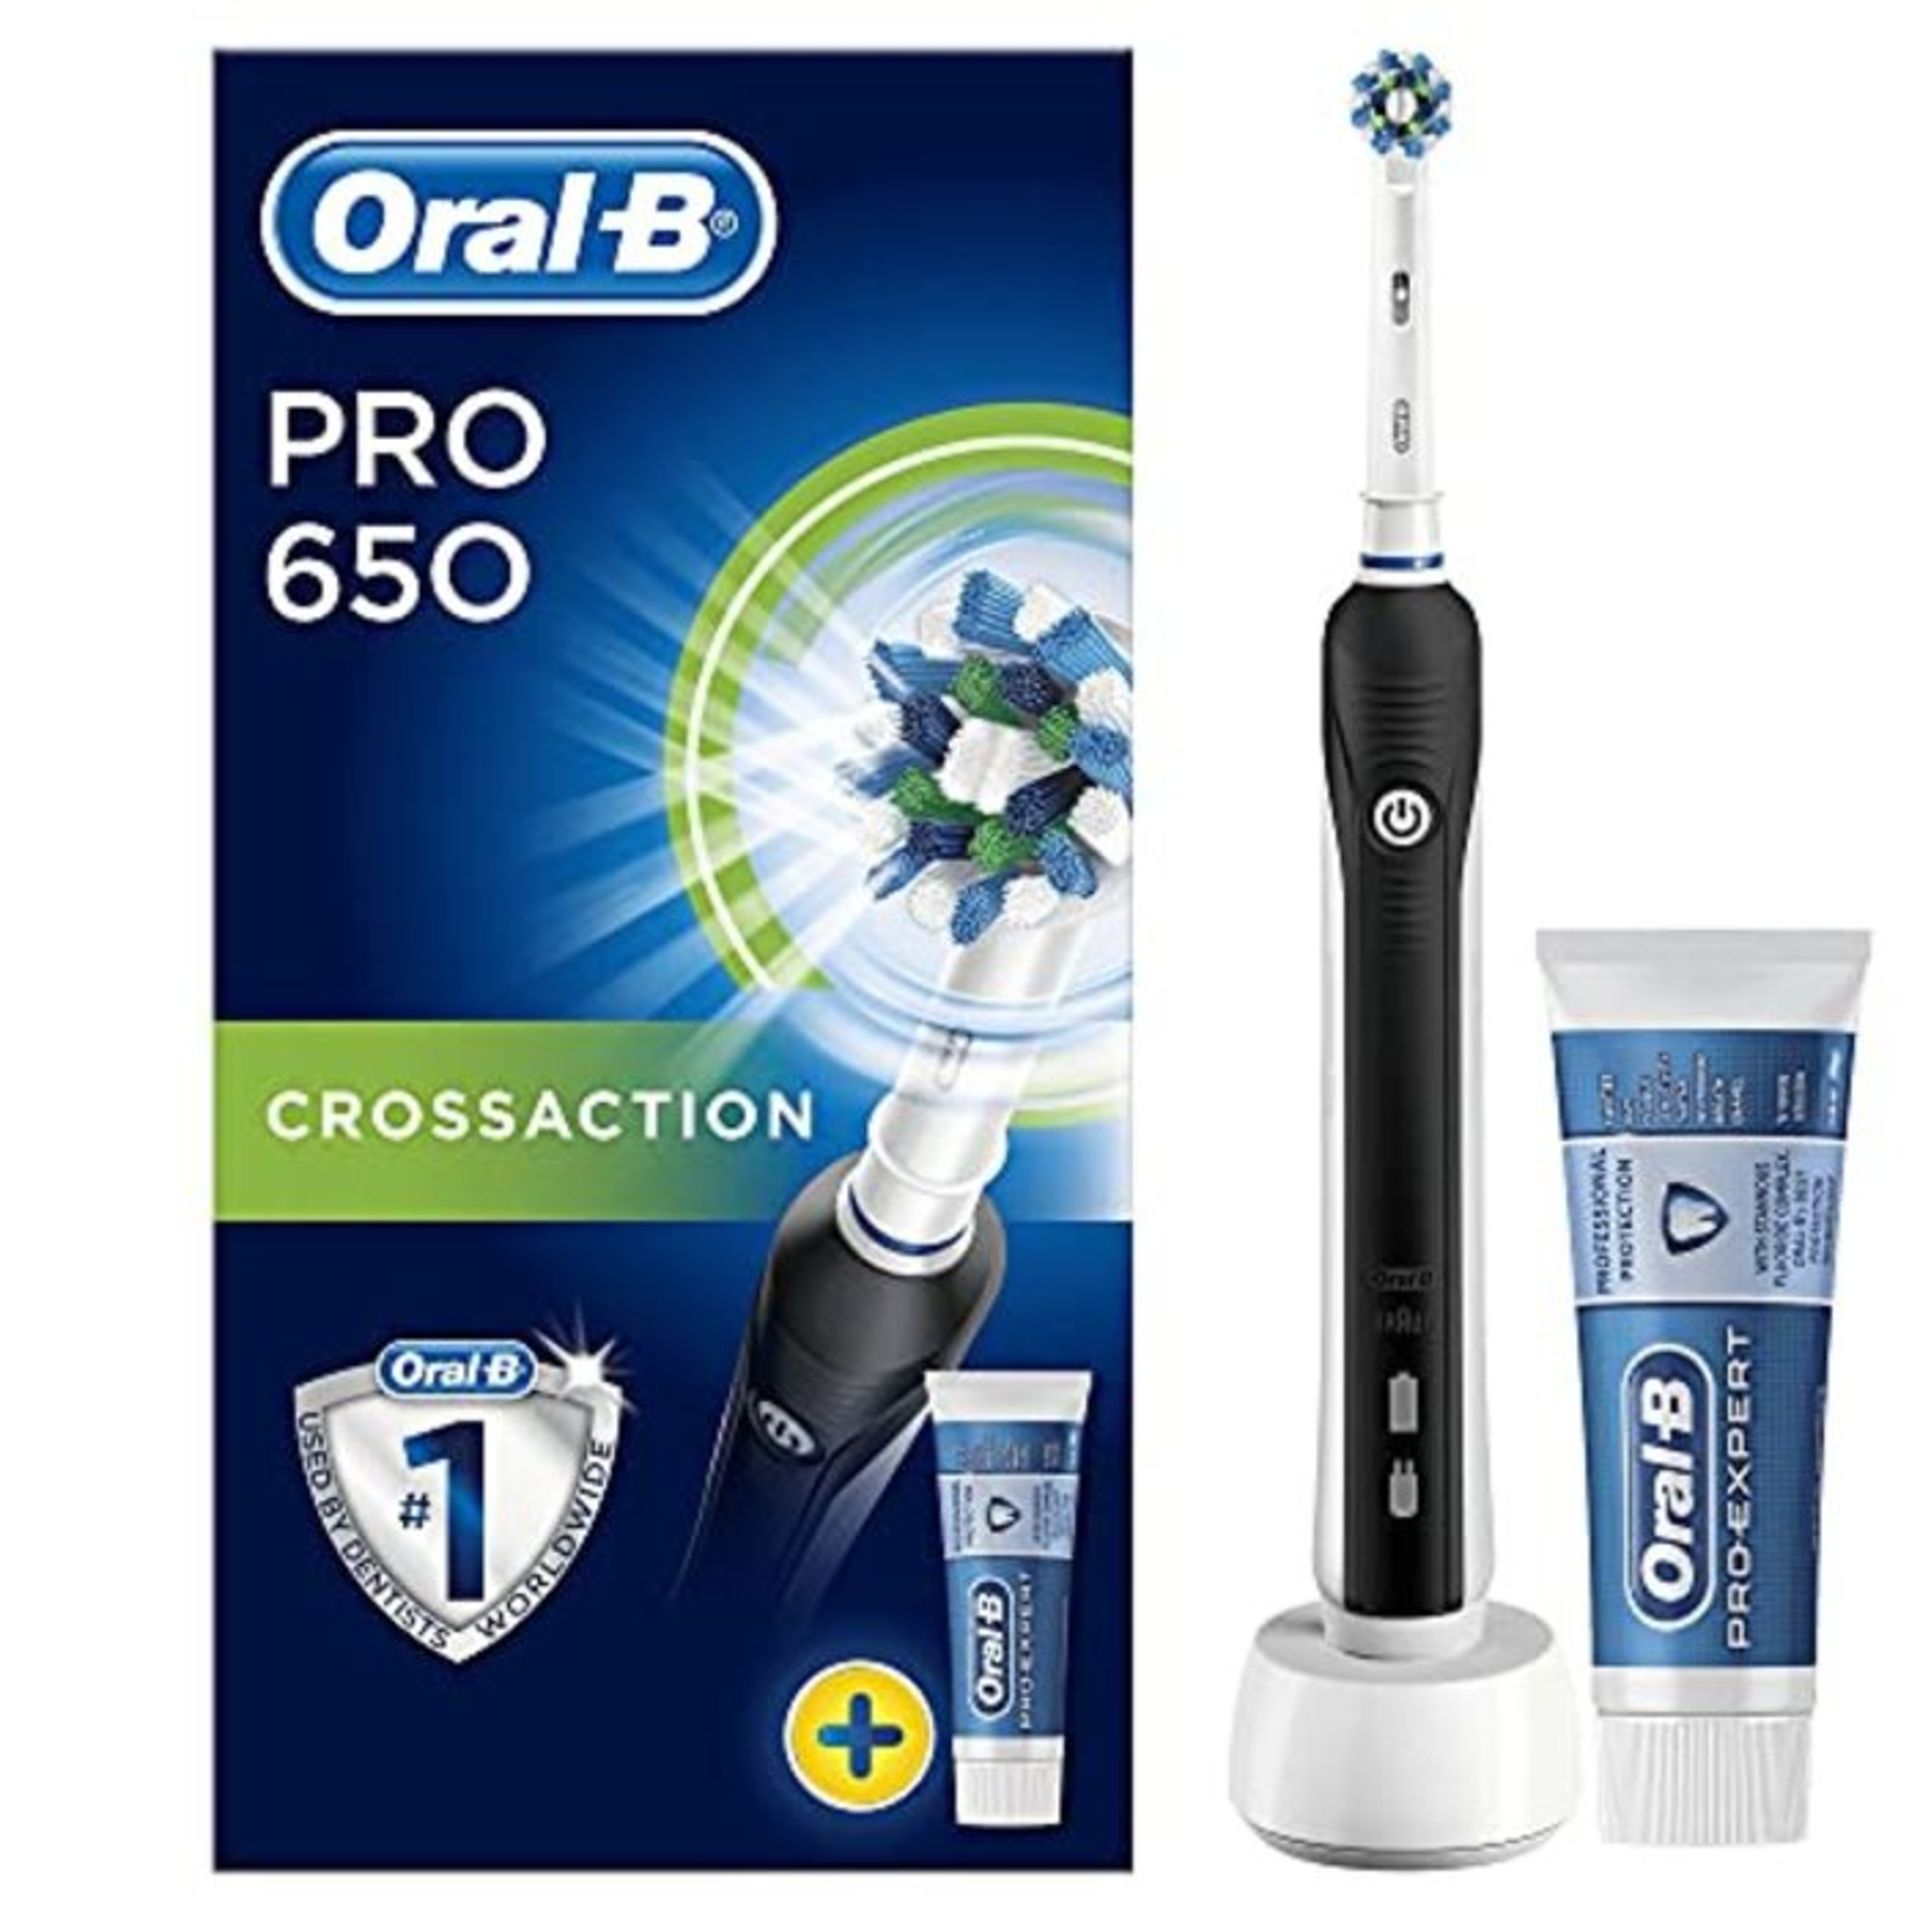 Oral-B Pro 650 Cross Action Electric Rechargeable Toothbrush Powered by Braun, 1 Black